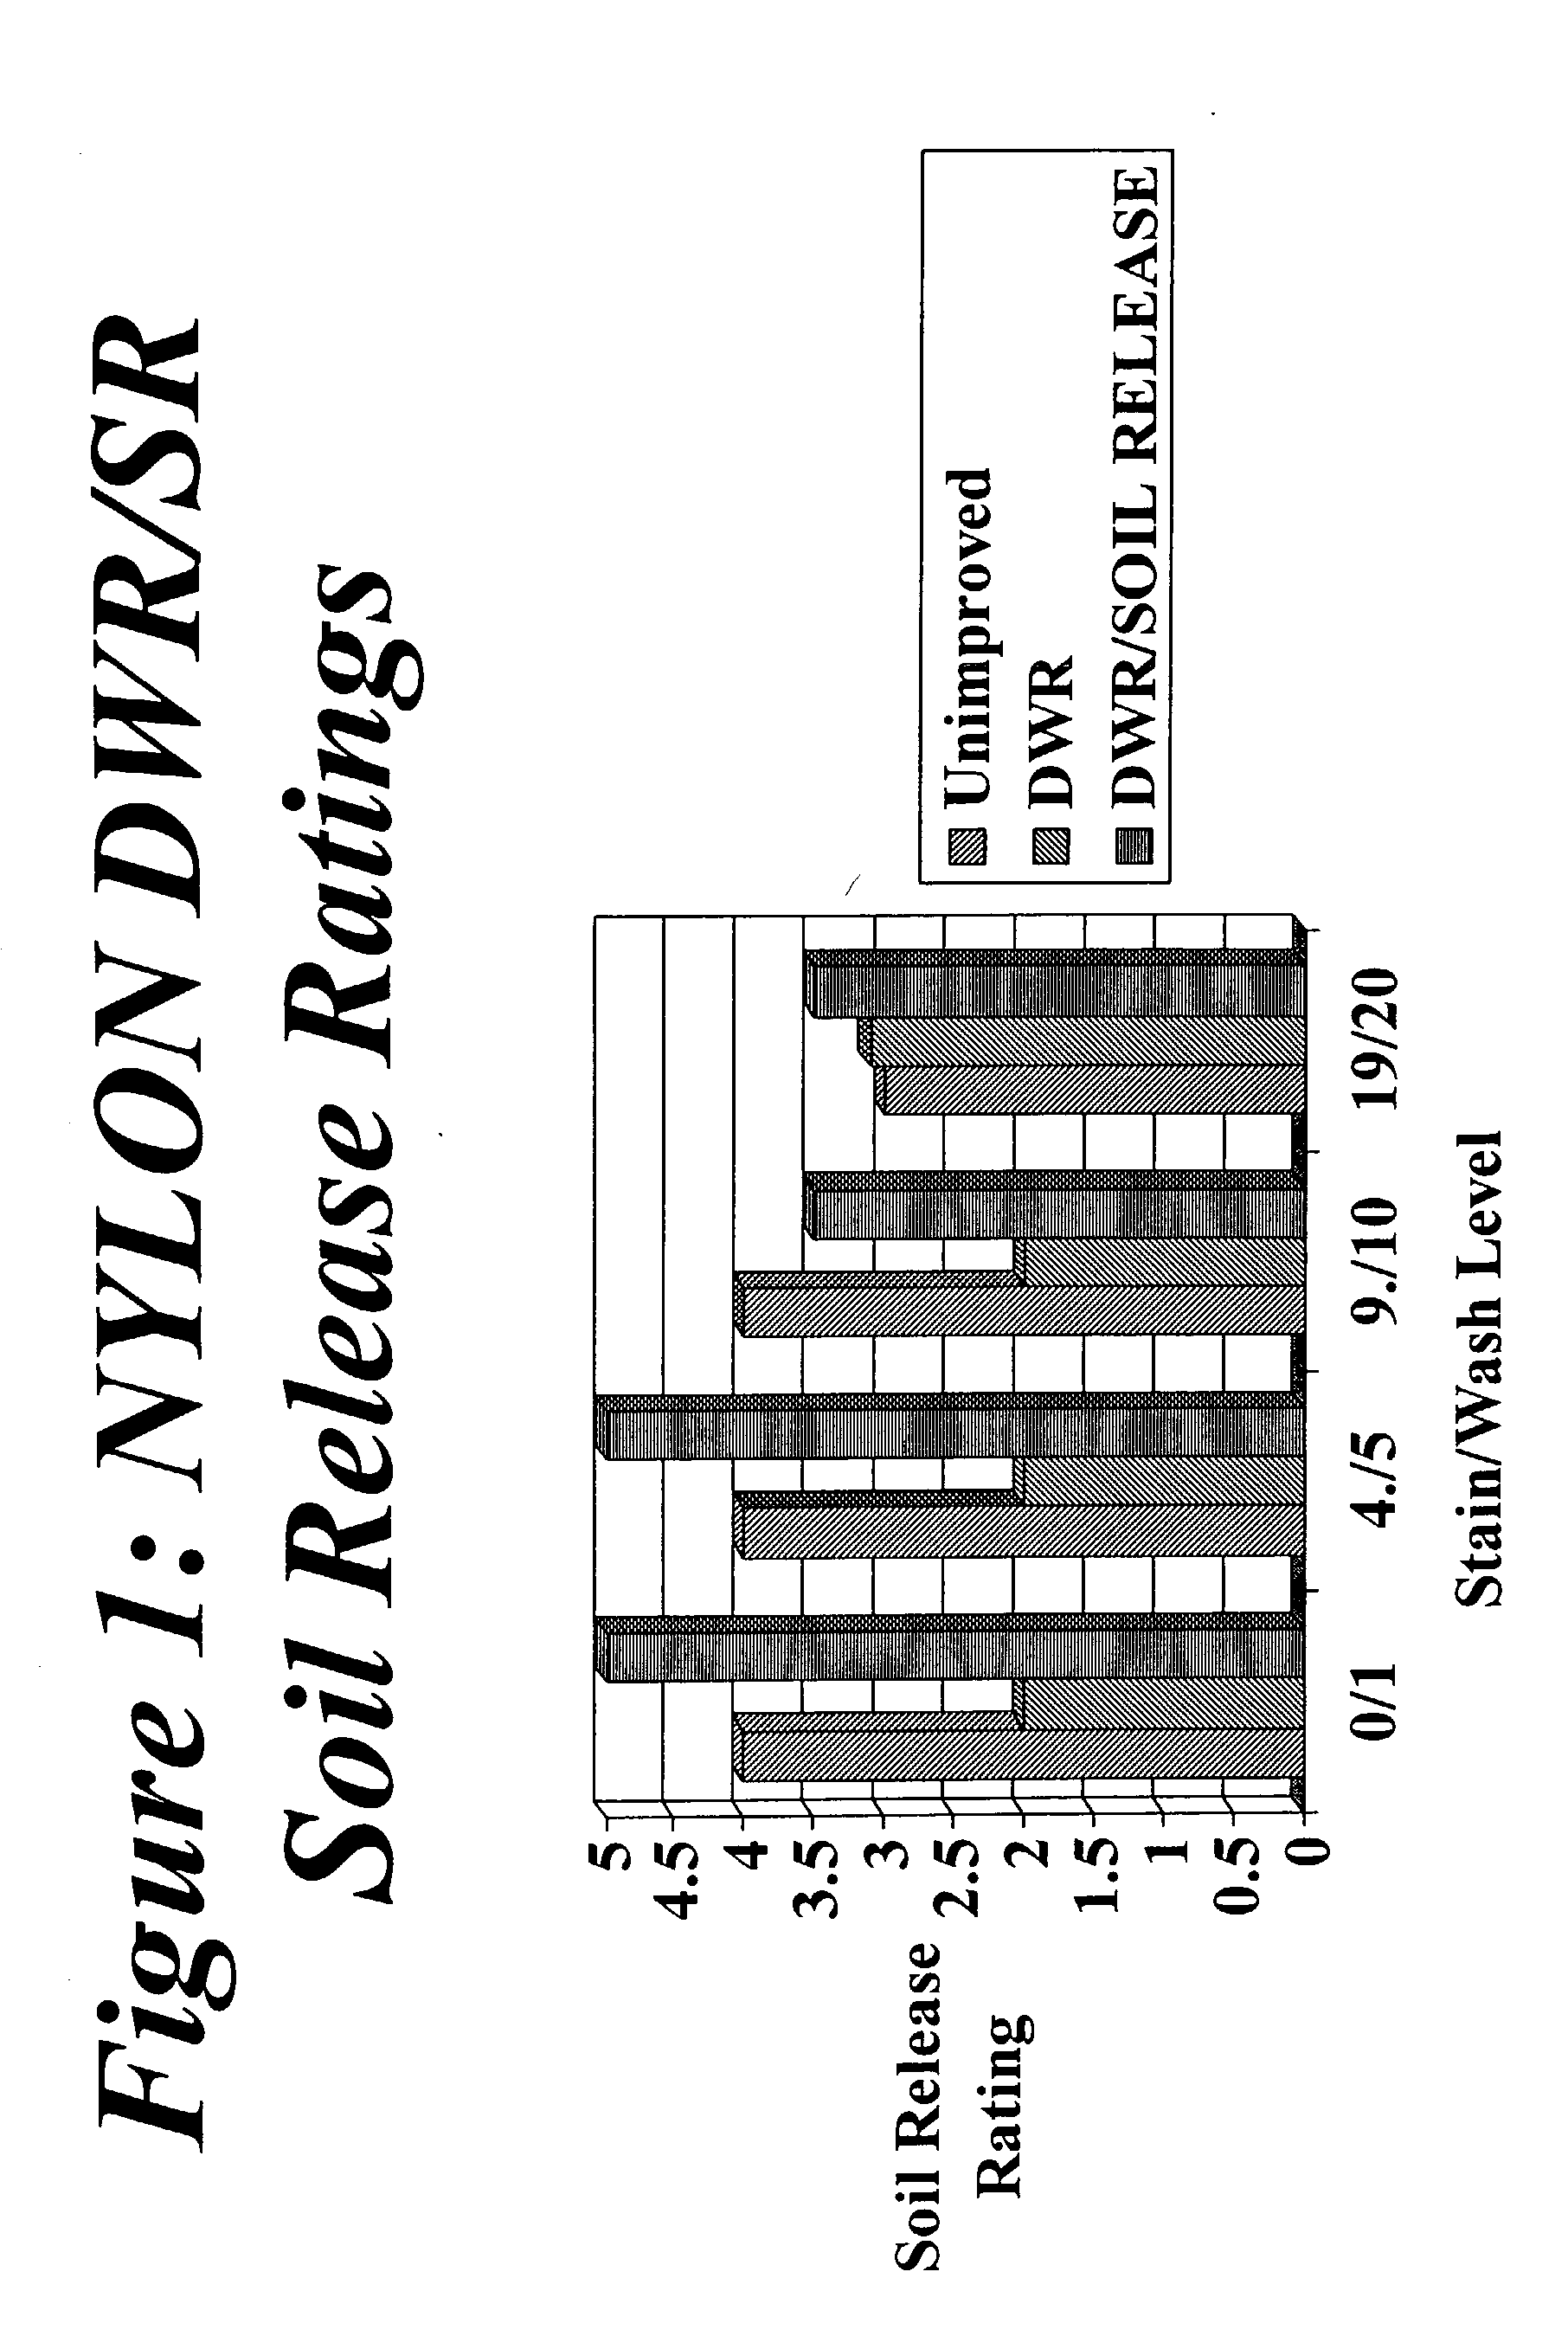 Textile substrates having improved durable water repellency and soil release and method for producing same